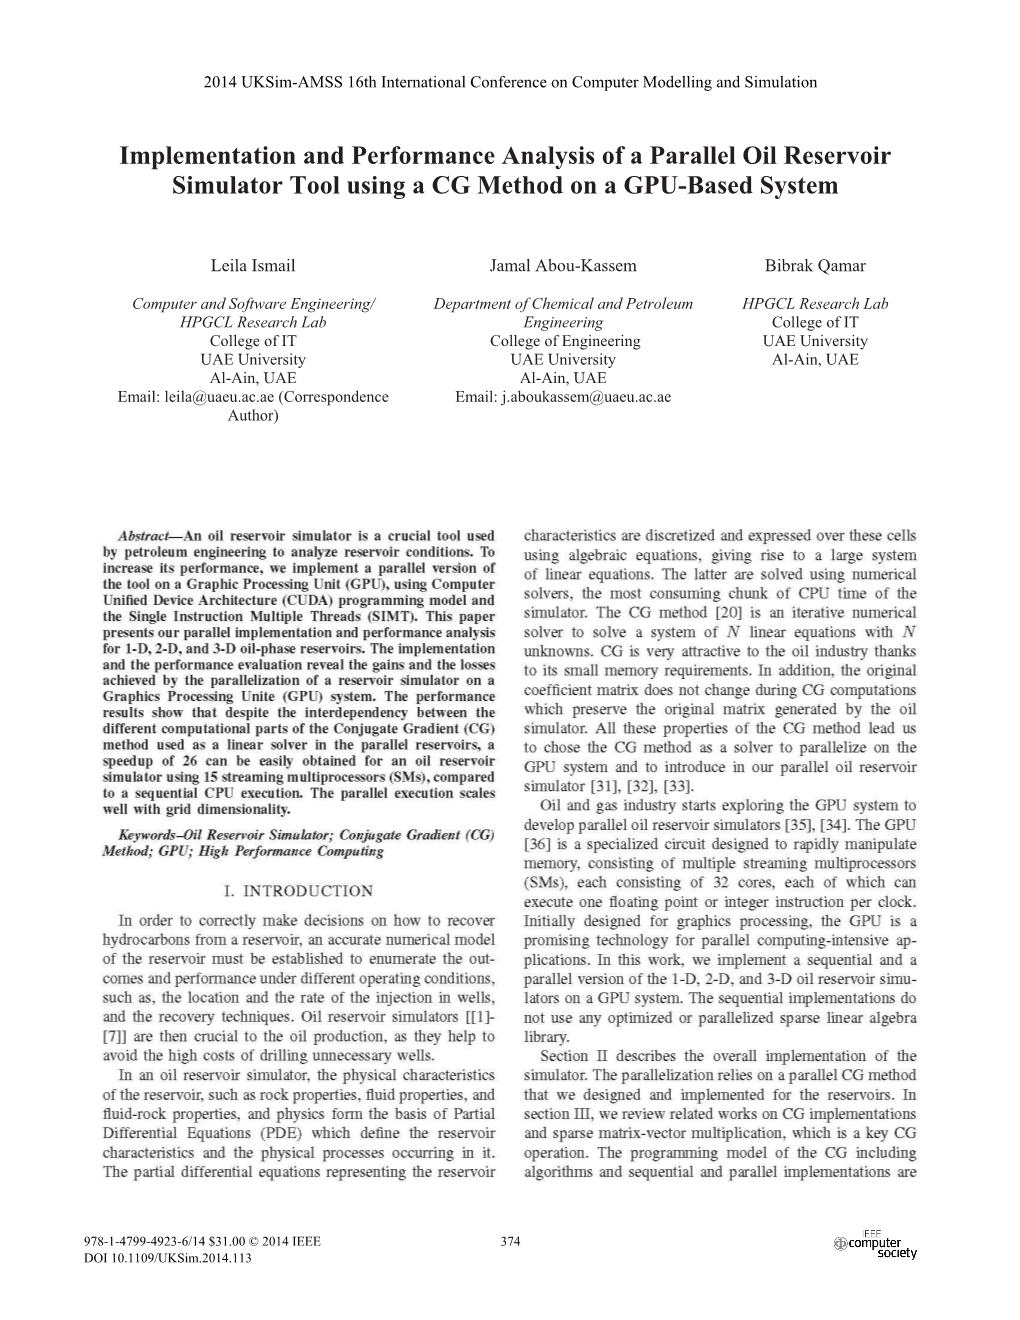 Implementation and Performance Analysis of a Parallel Oil Reservoir Simulator Tool Using a CG Method on a GPU-Based System